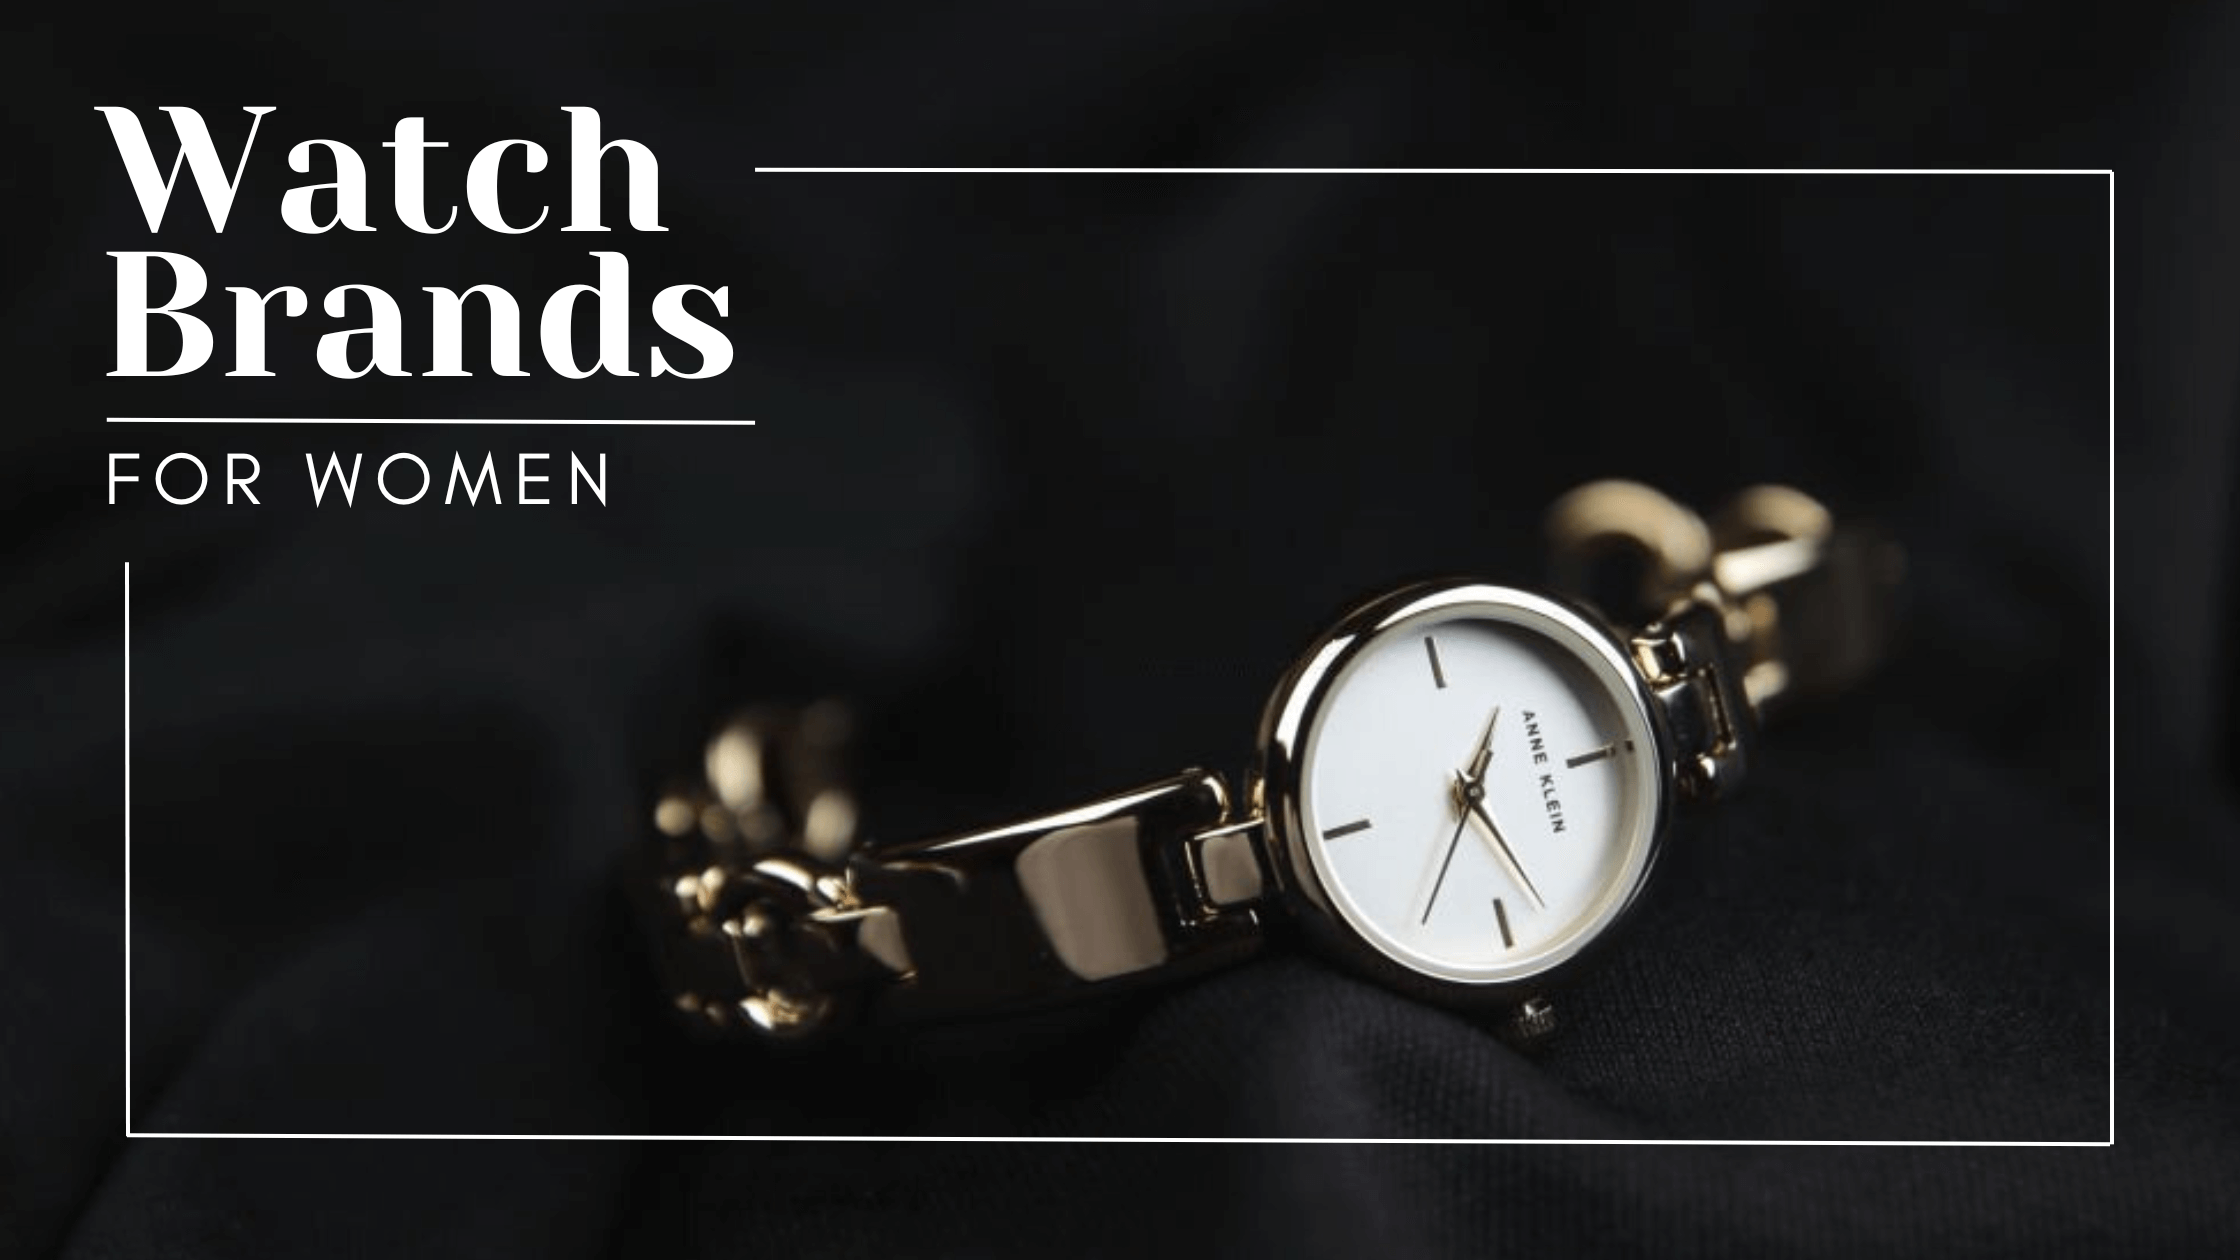 Which Are Some Of The Best Watch Brands For Women?